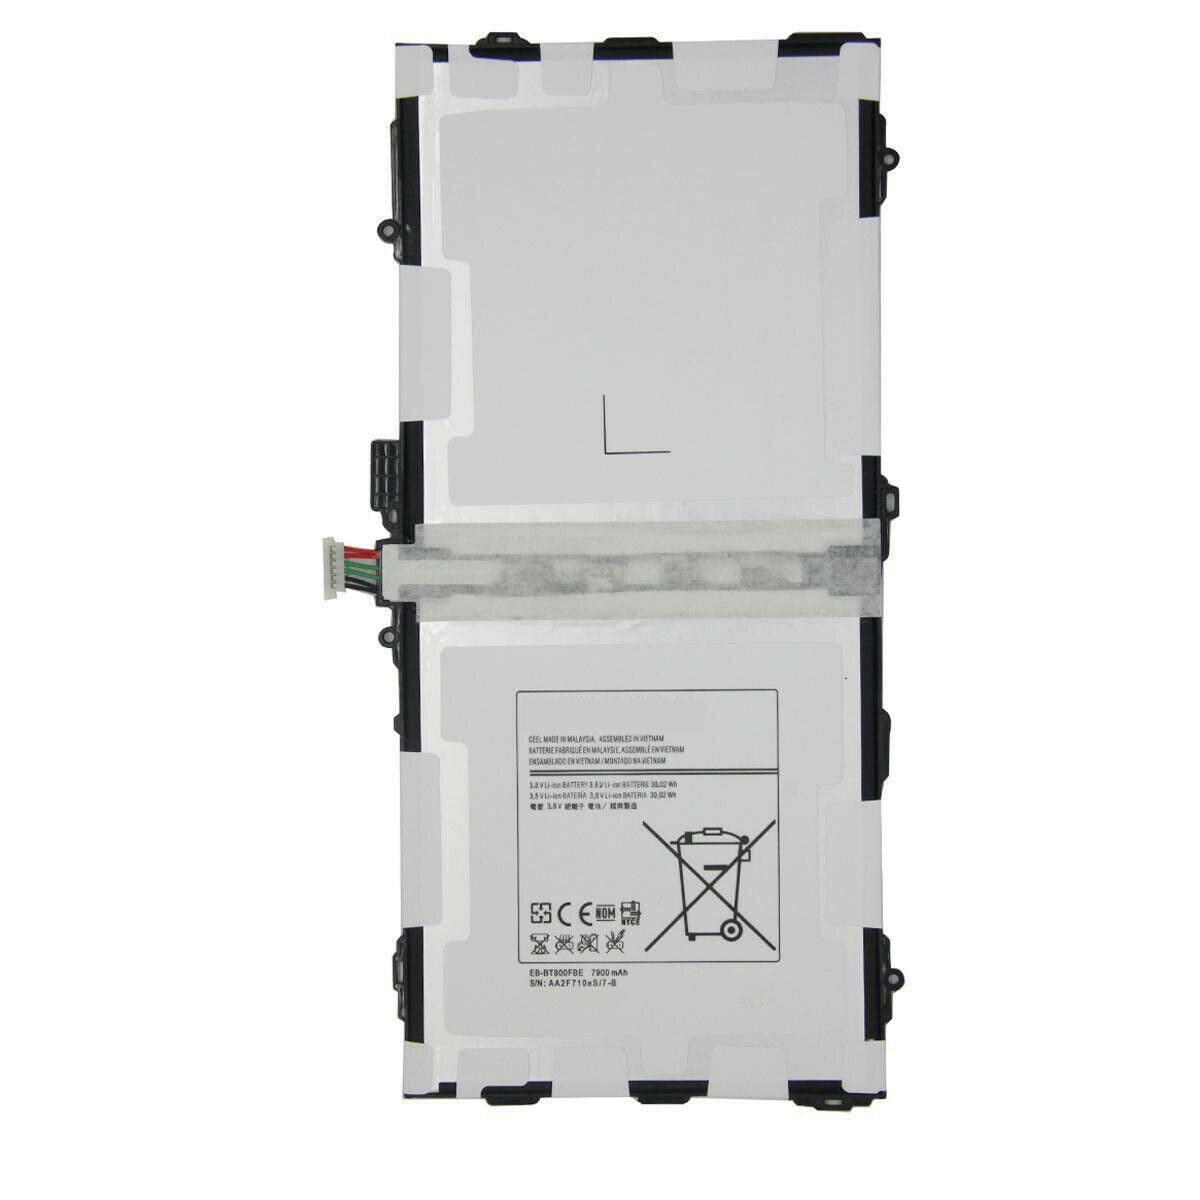 Replacement Battery For Samsung Galaxy Tab S 10.5" - EB-BT800FBE